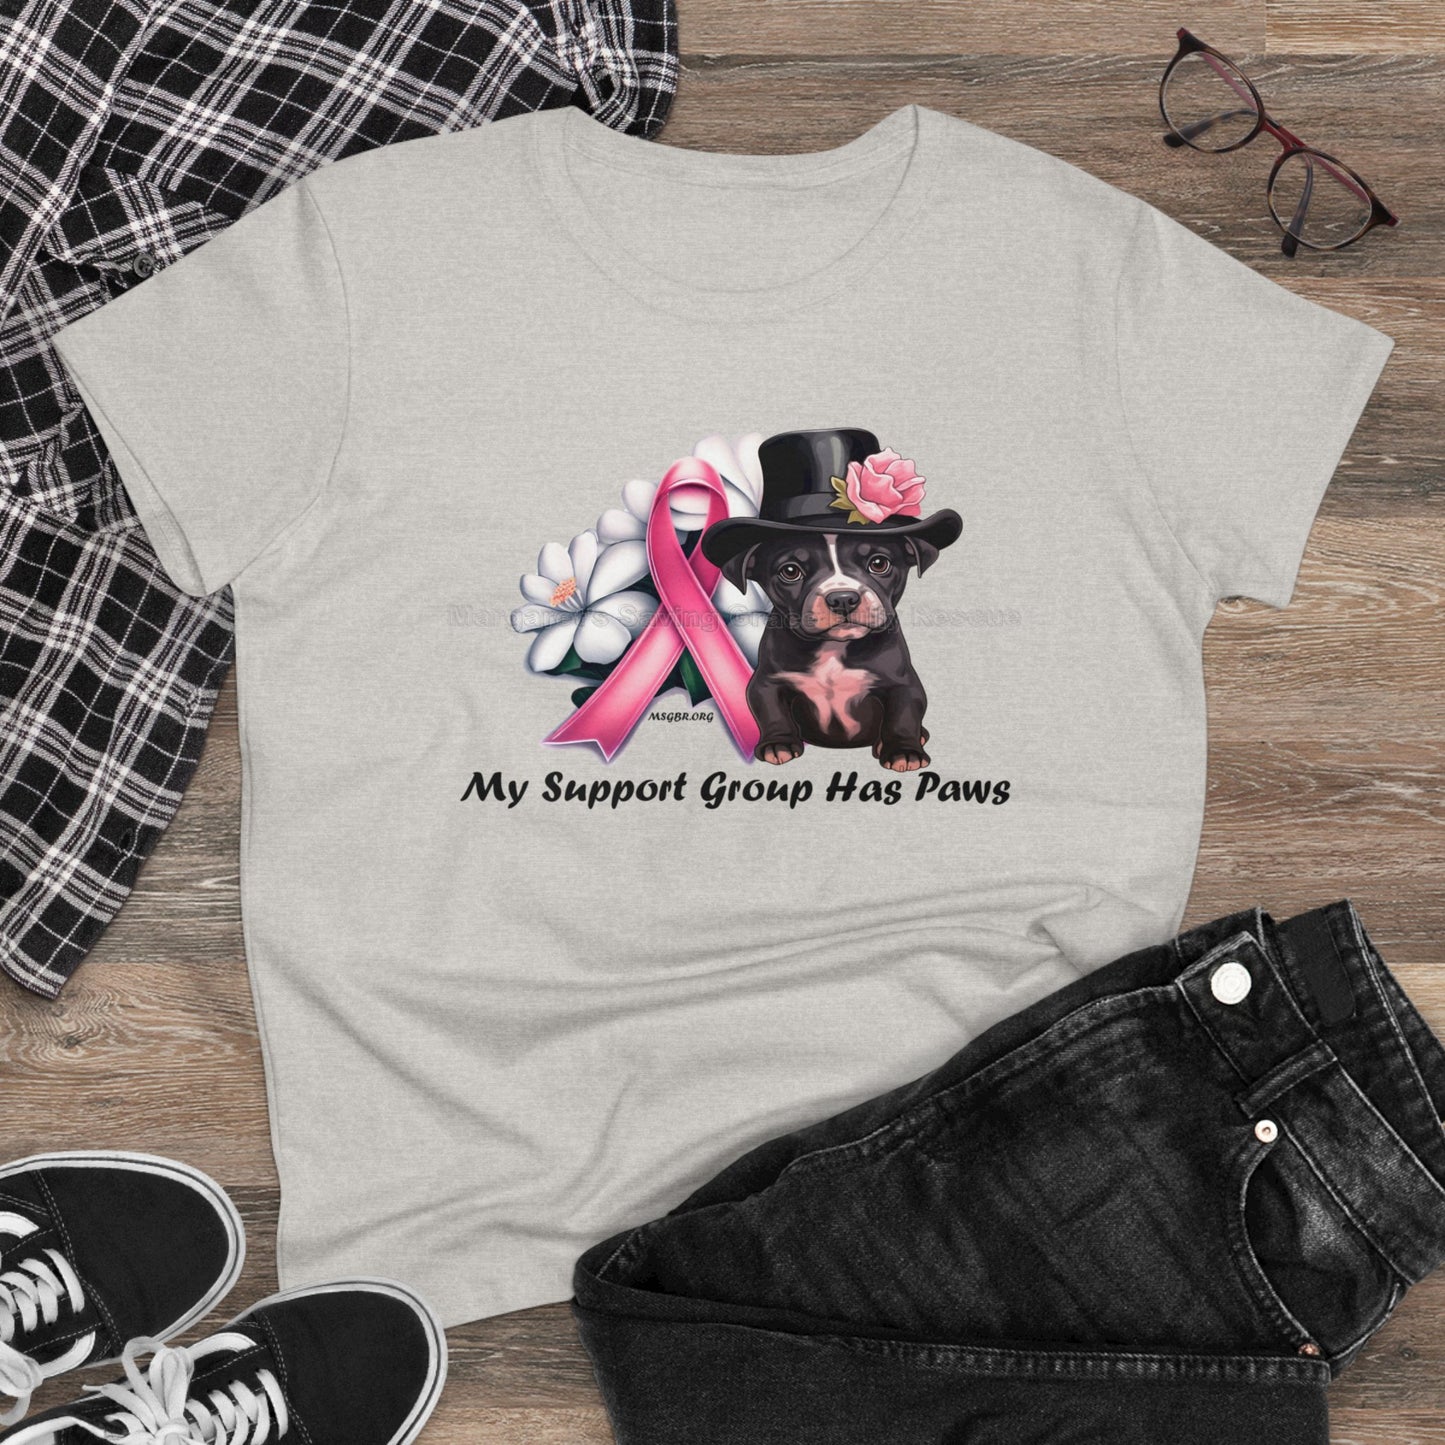 MSGBR Bully Rescue Pitbull Dog Breed Breast Cancer Support Group Has Paws T Shirt